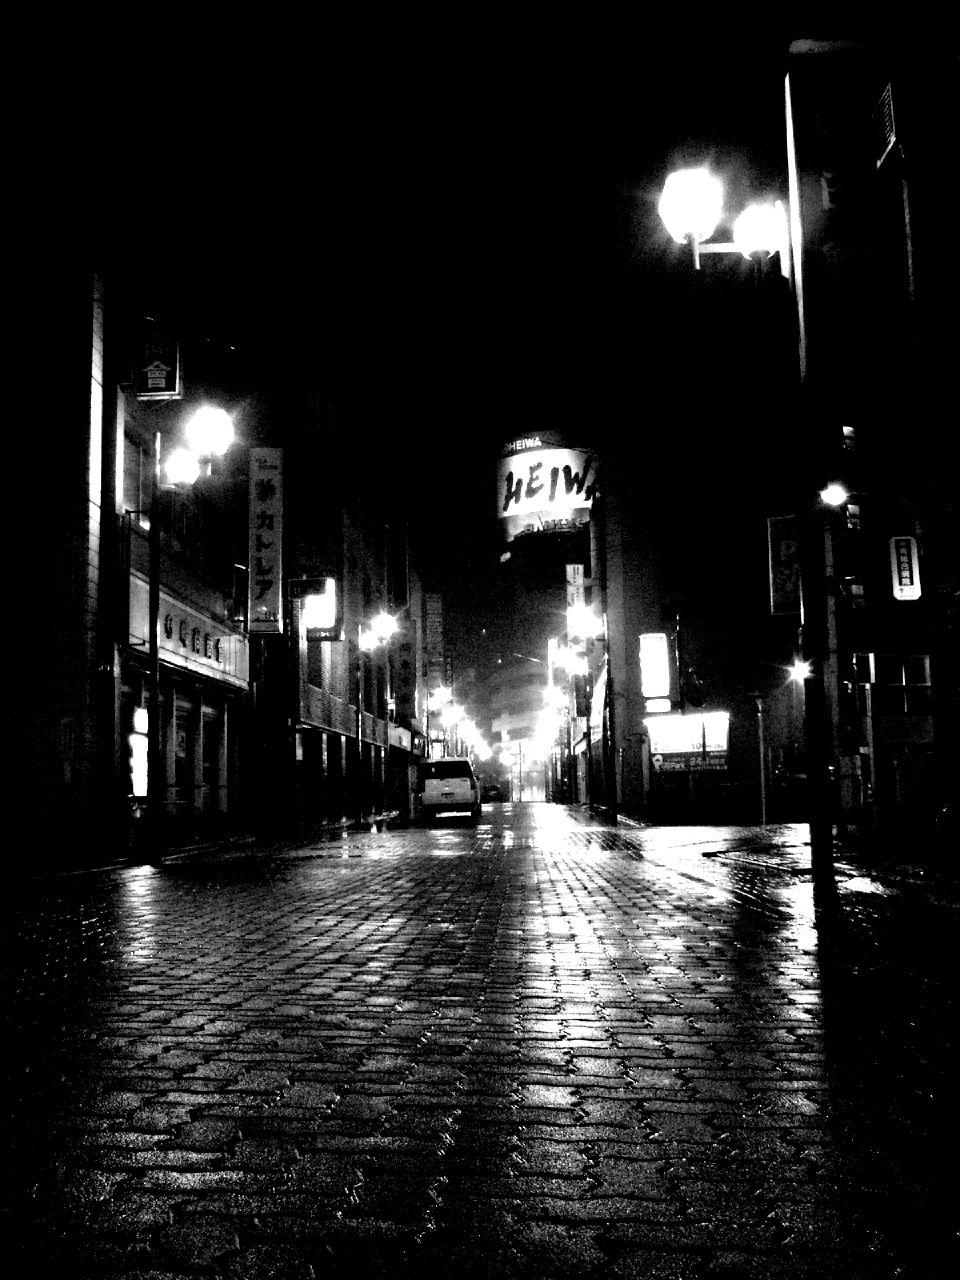 an empty brick street in the dark during the night